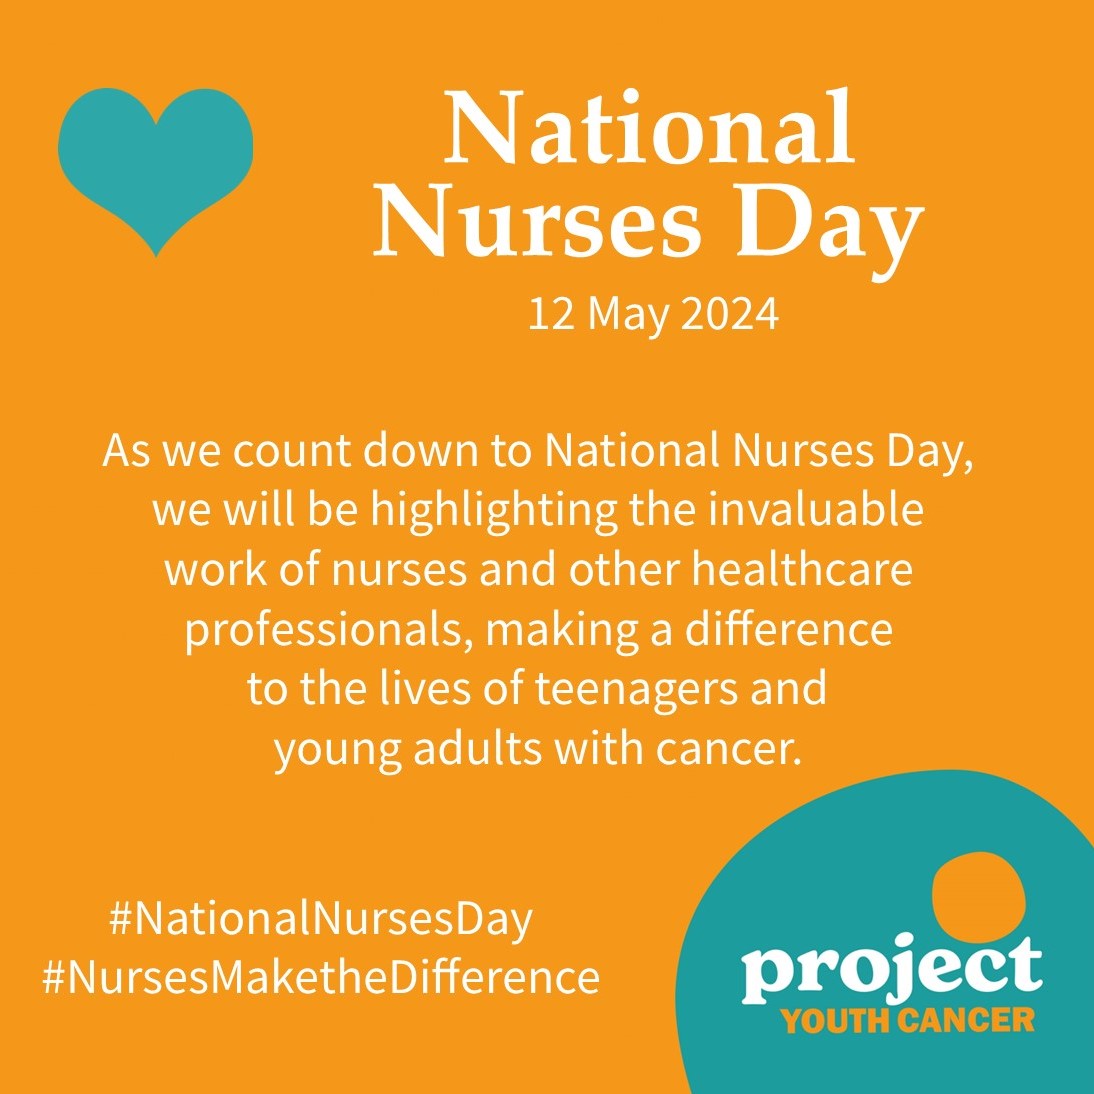 As we count down this week to National Nurses Day on 12th May, we'll be highlighting the work of nurses and healthcare professionals, that make a difference to the lives of teenagers and young adults with cancer. #NationalNursesDay #NationalNursesDay2024 #NursesMaketheDifference